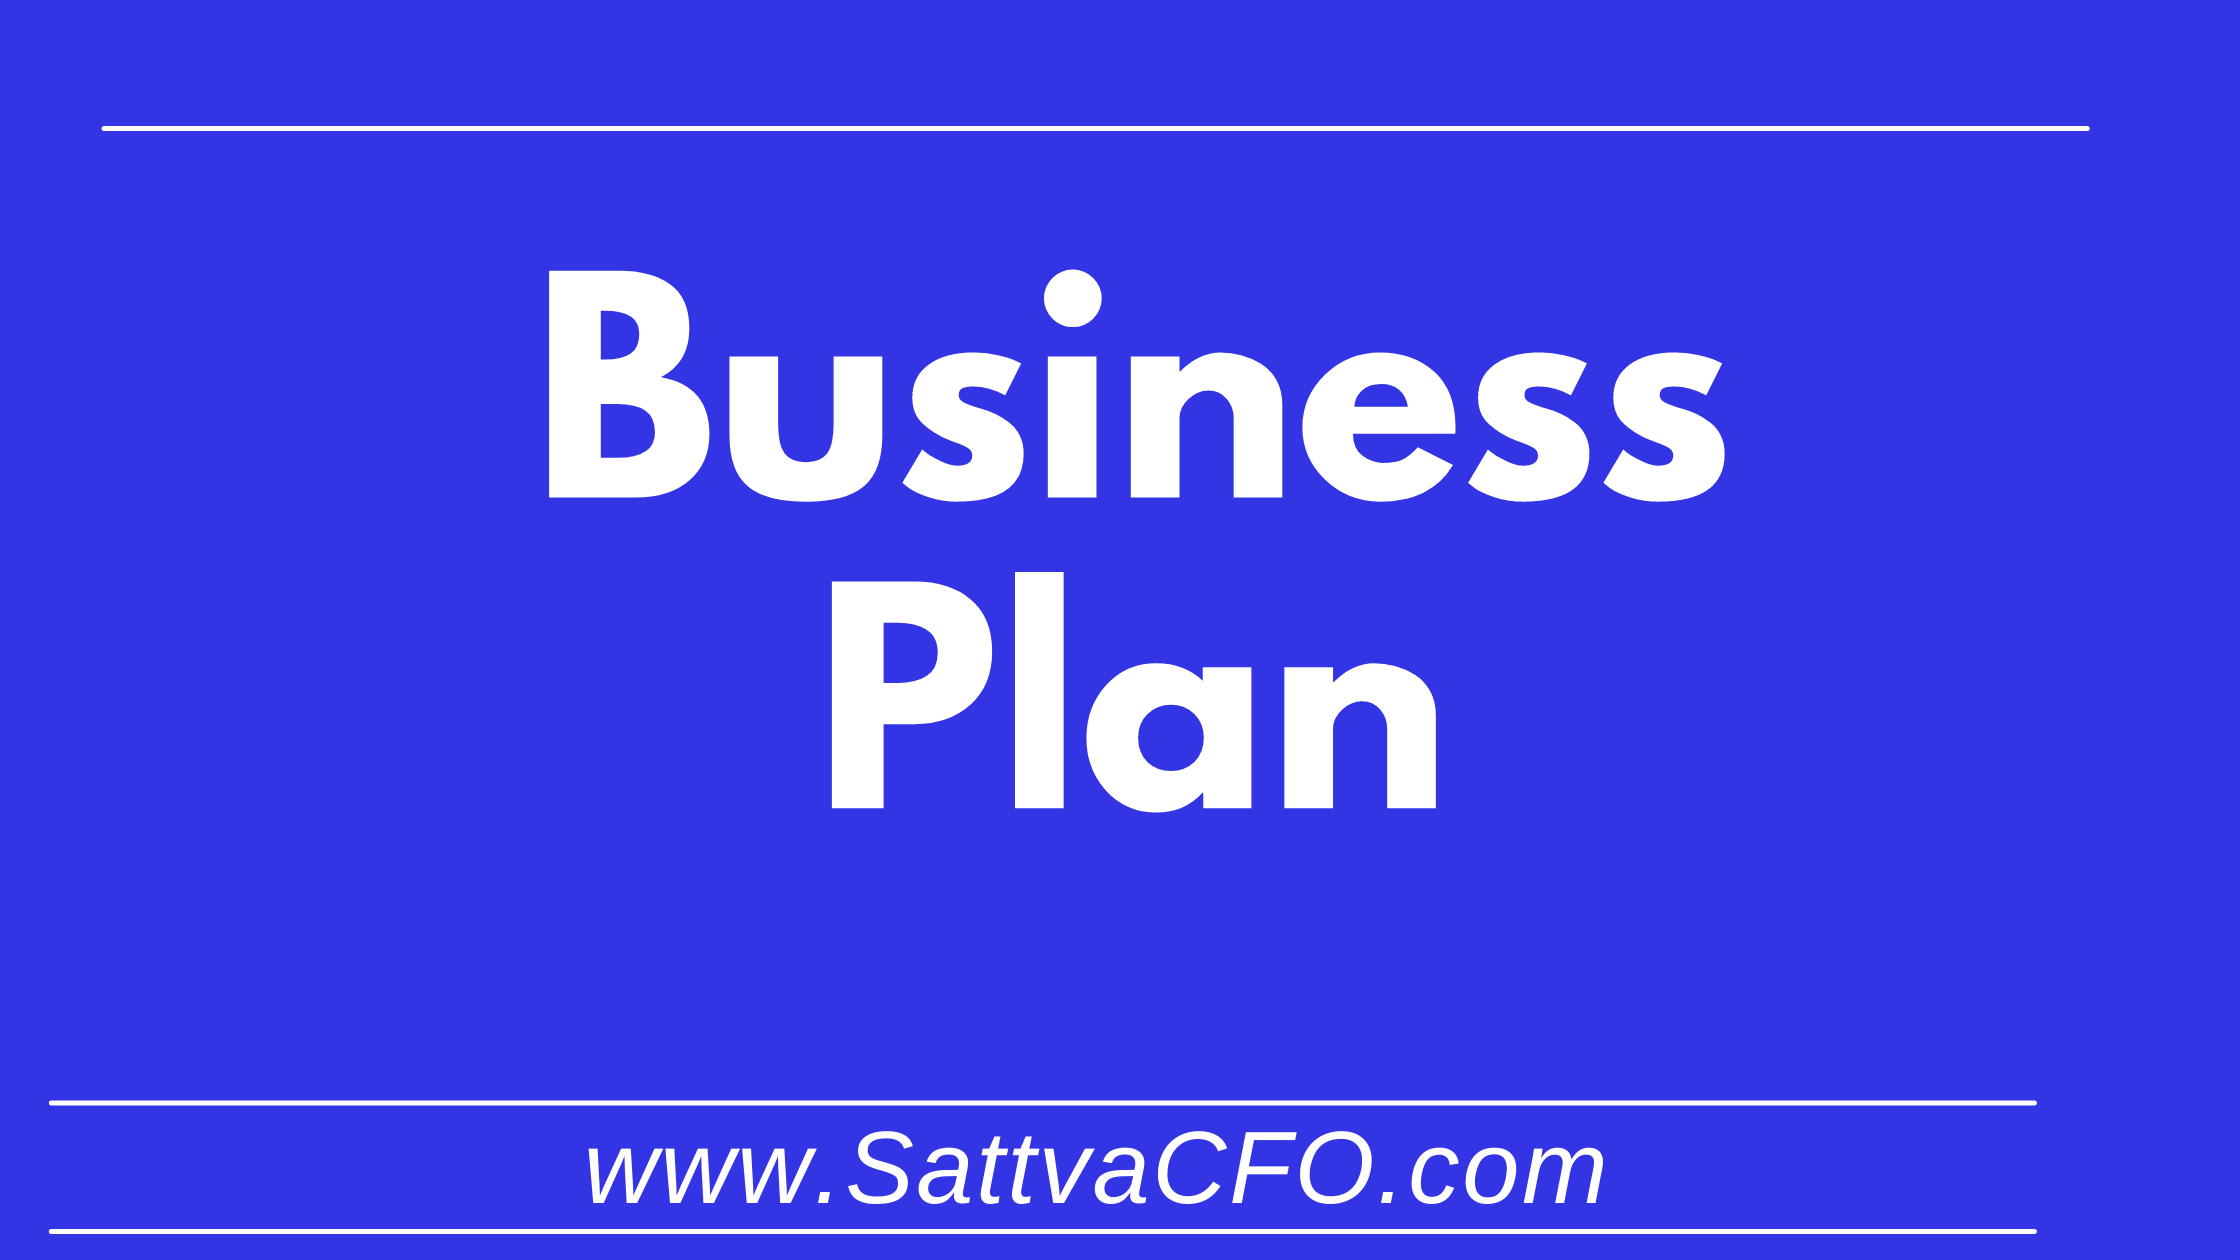 Business Plan – Contents and Benefits | SattvaCFO